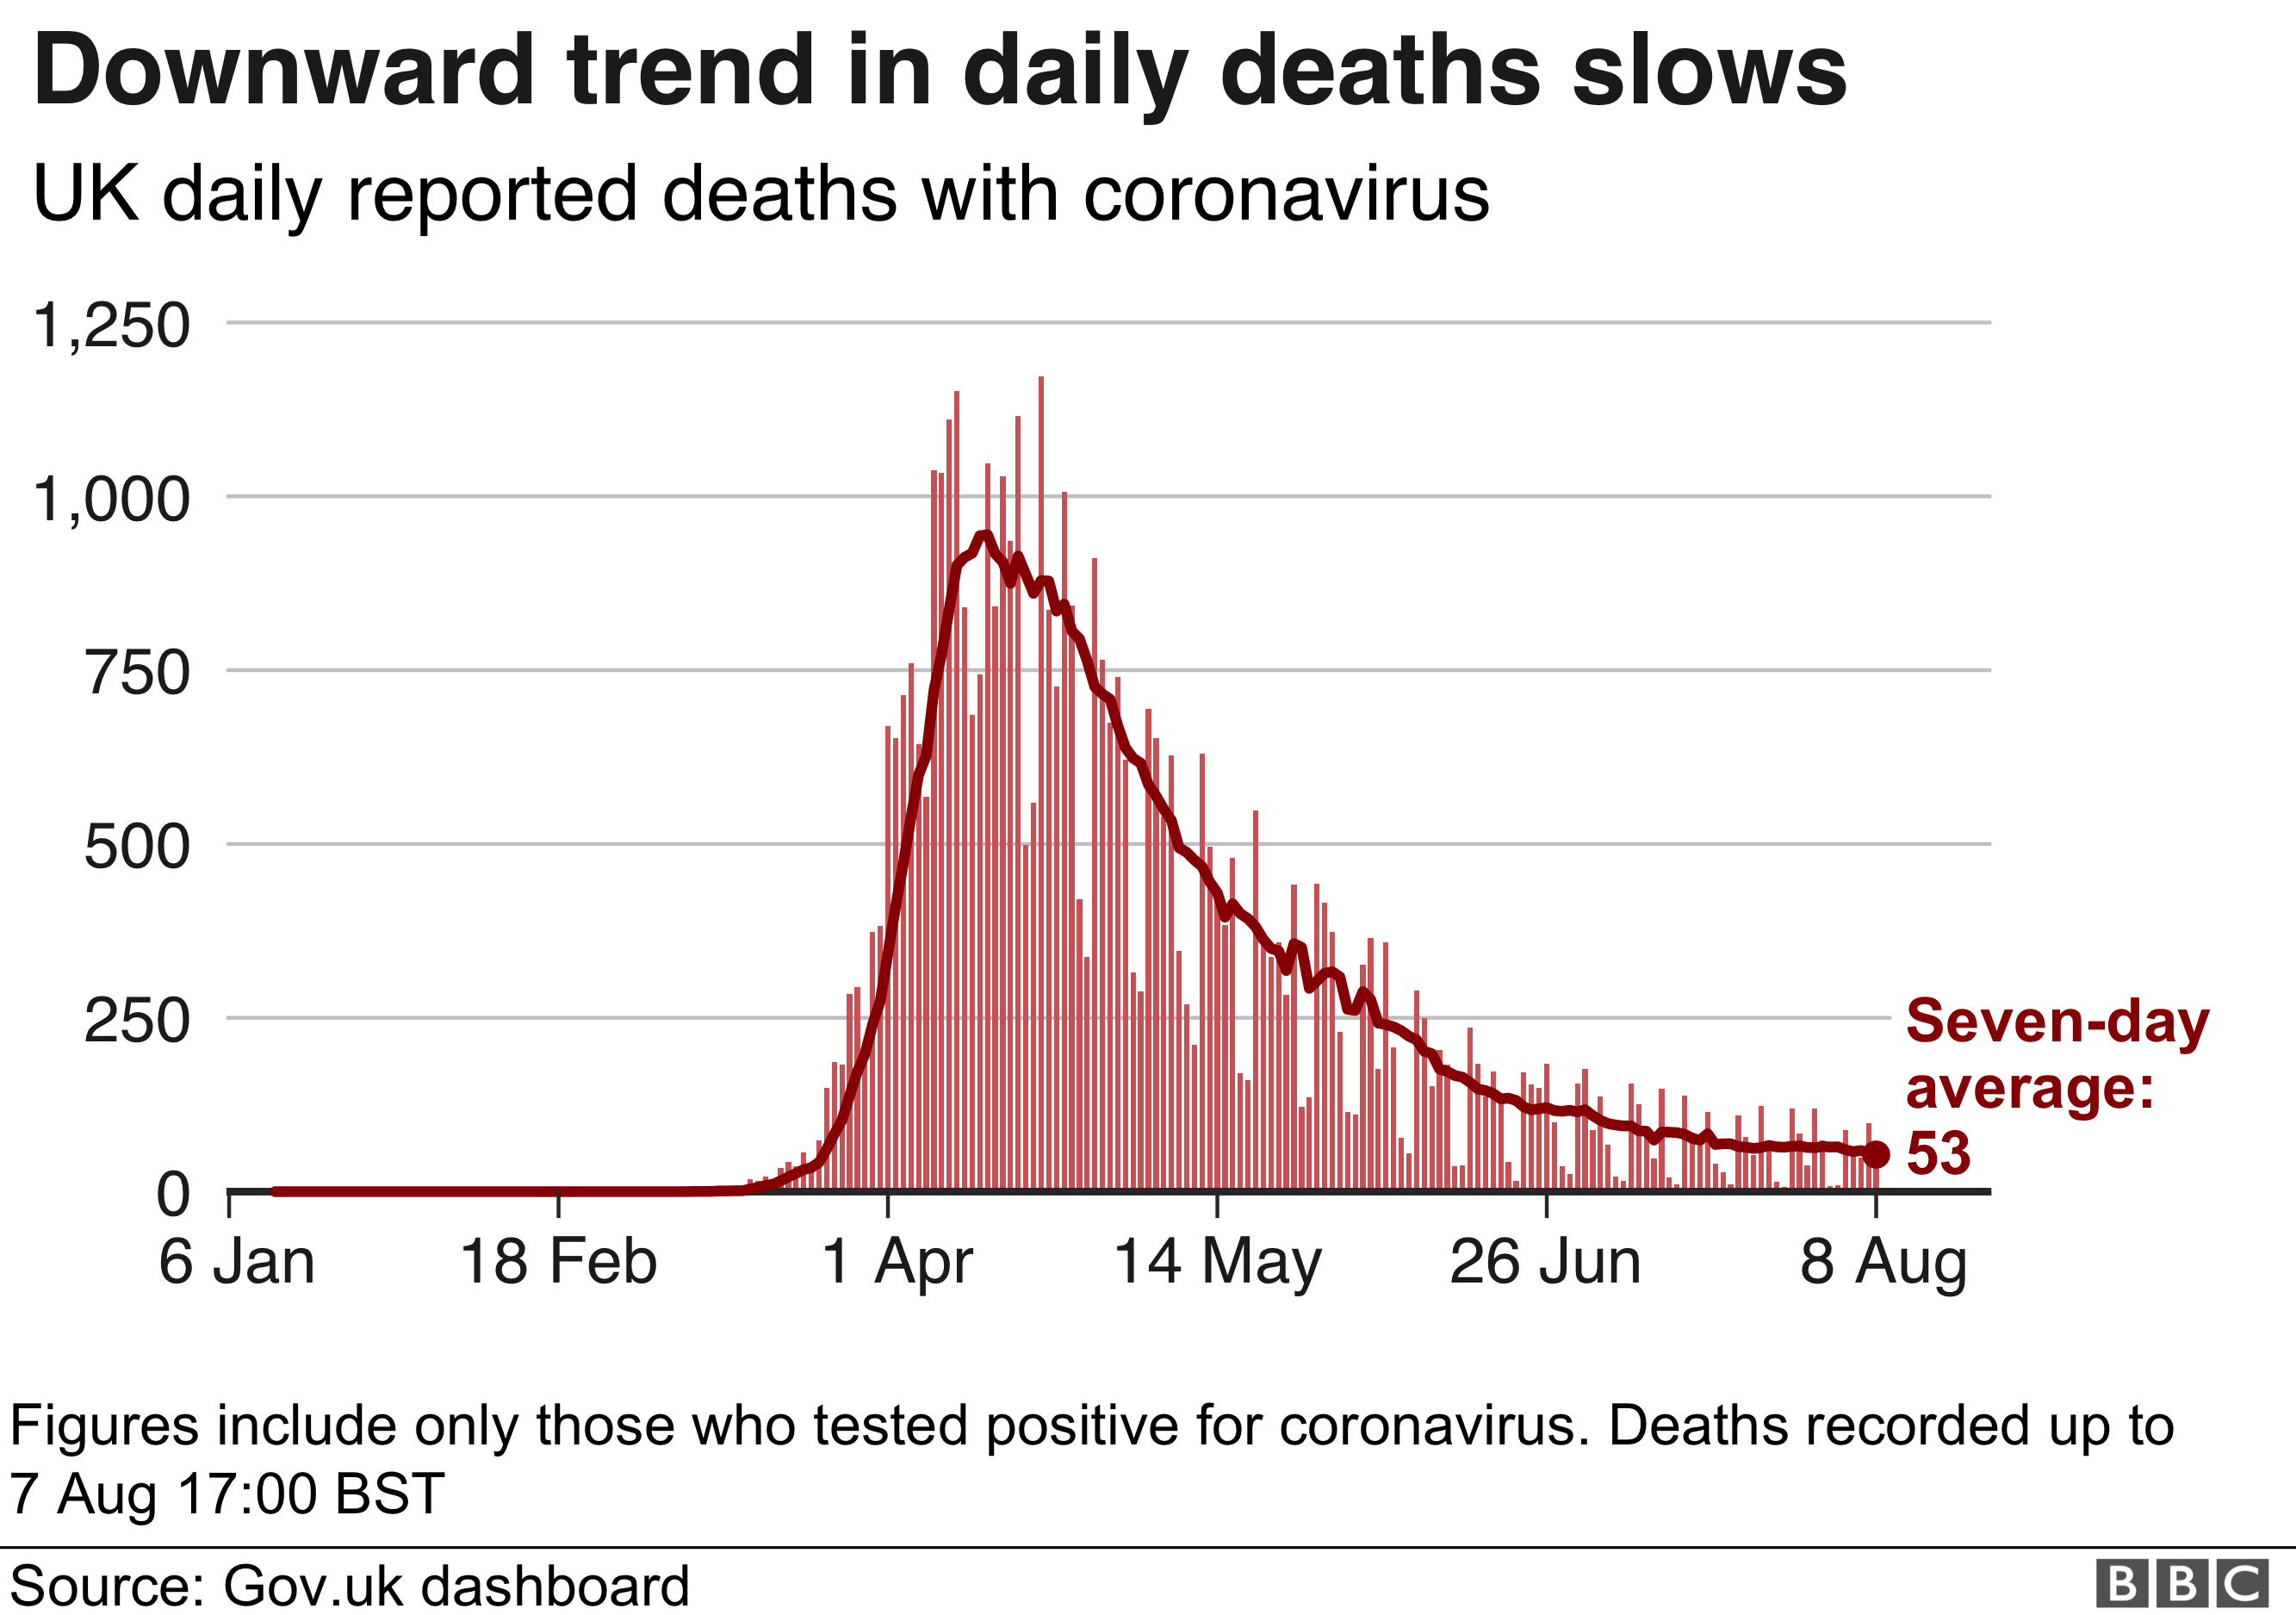 Chart shows downward trend in daily deaths has slowed